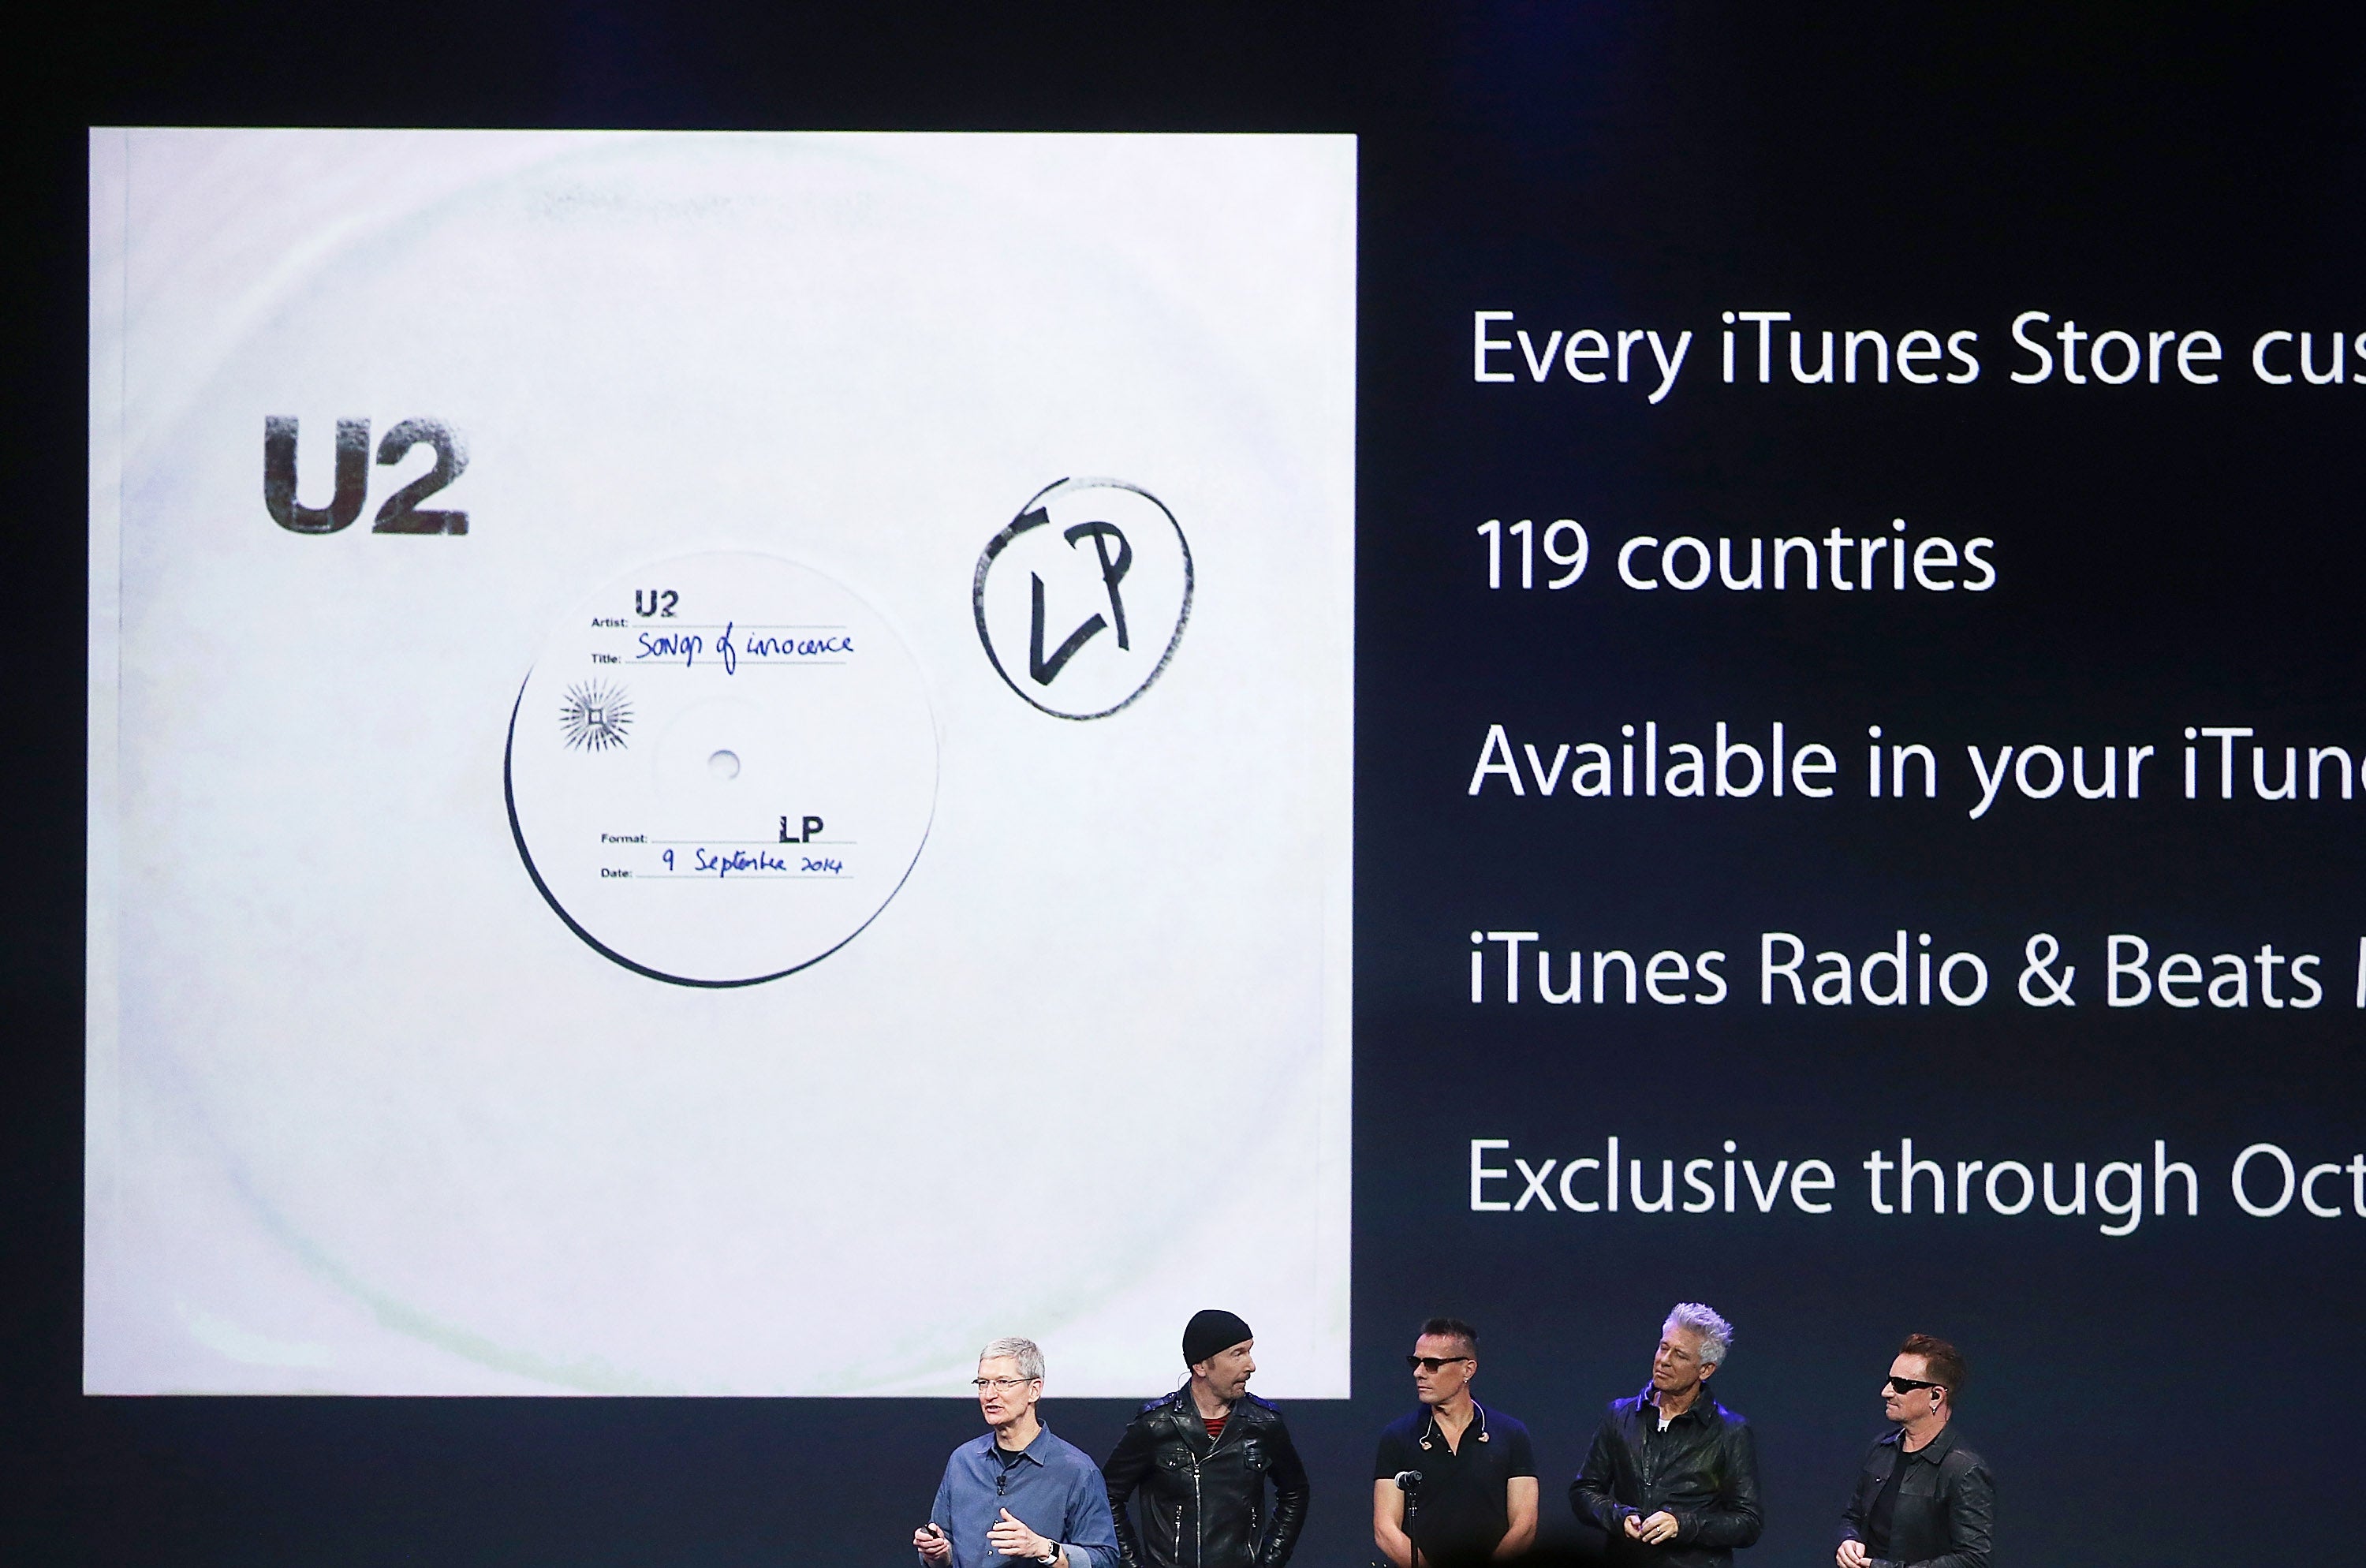 The album was downloaded onto devices of iTunes customers around the world as soon as it was announced